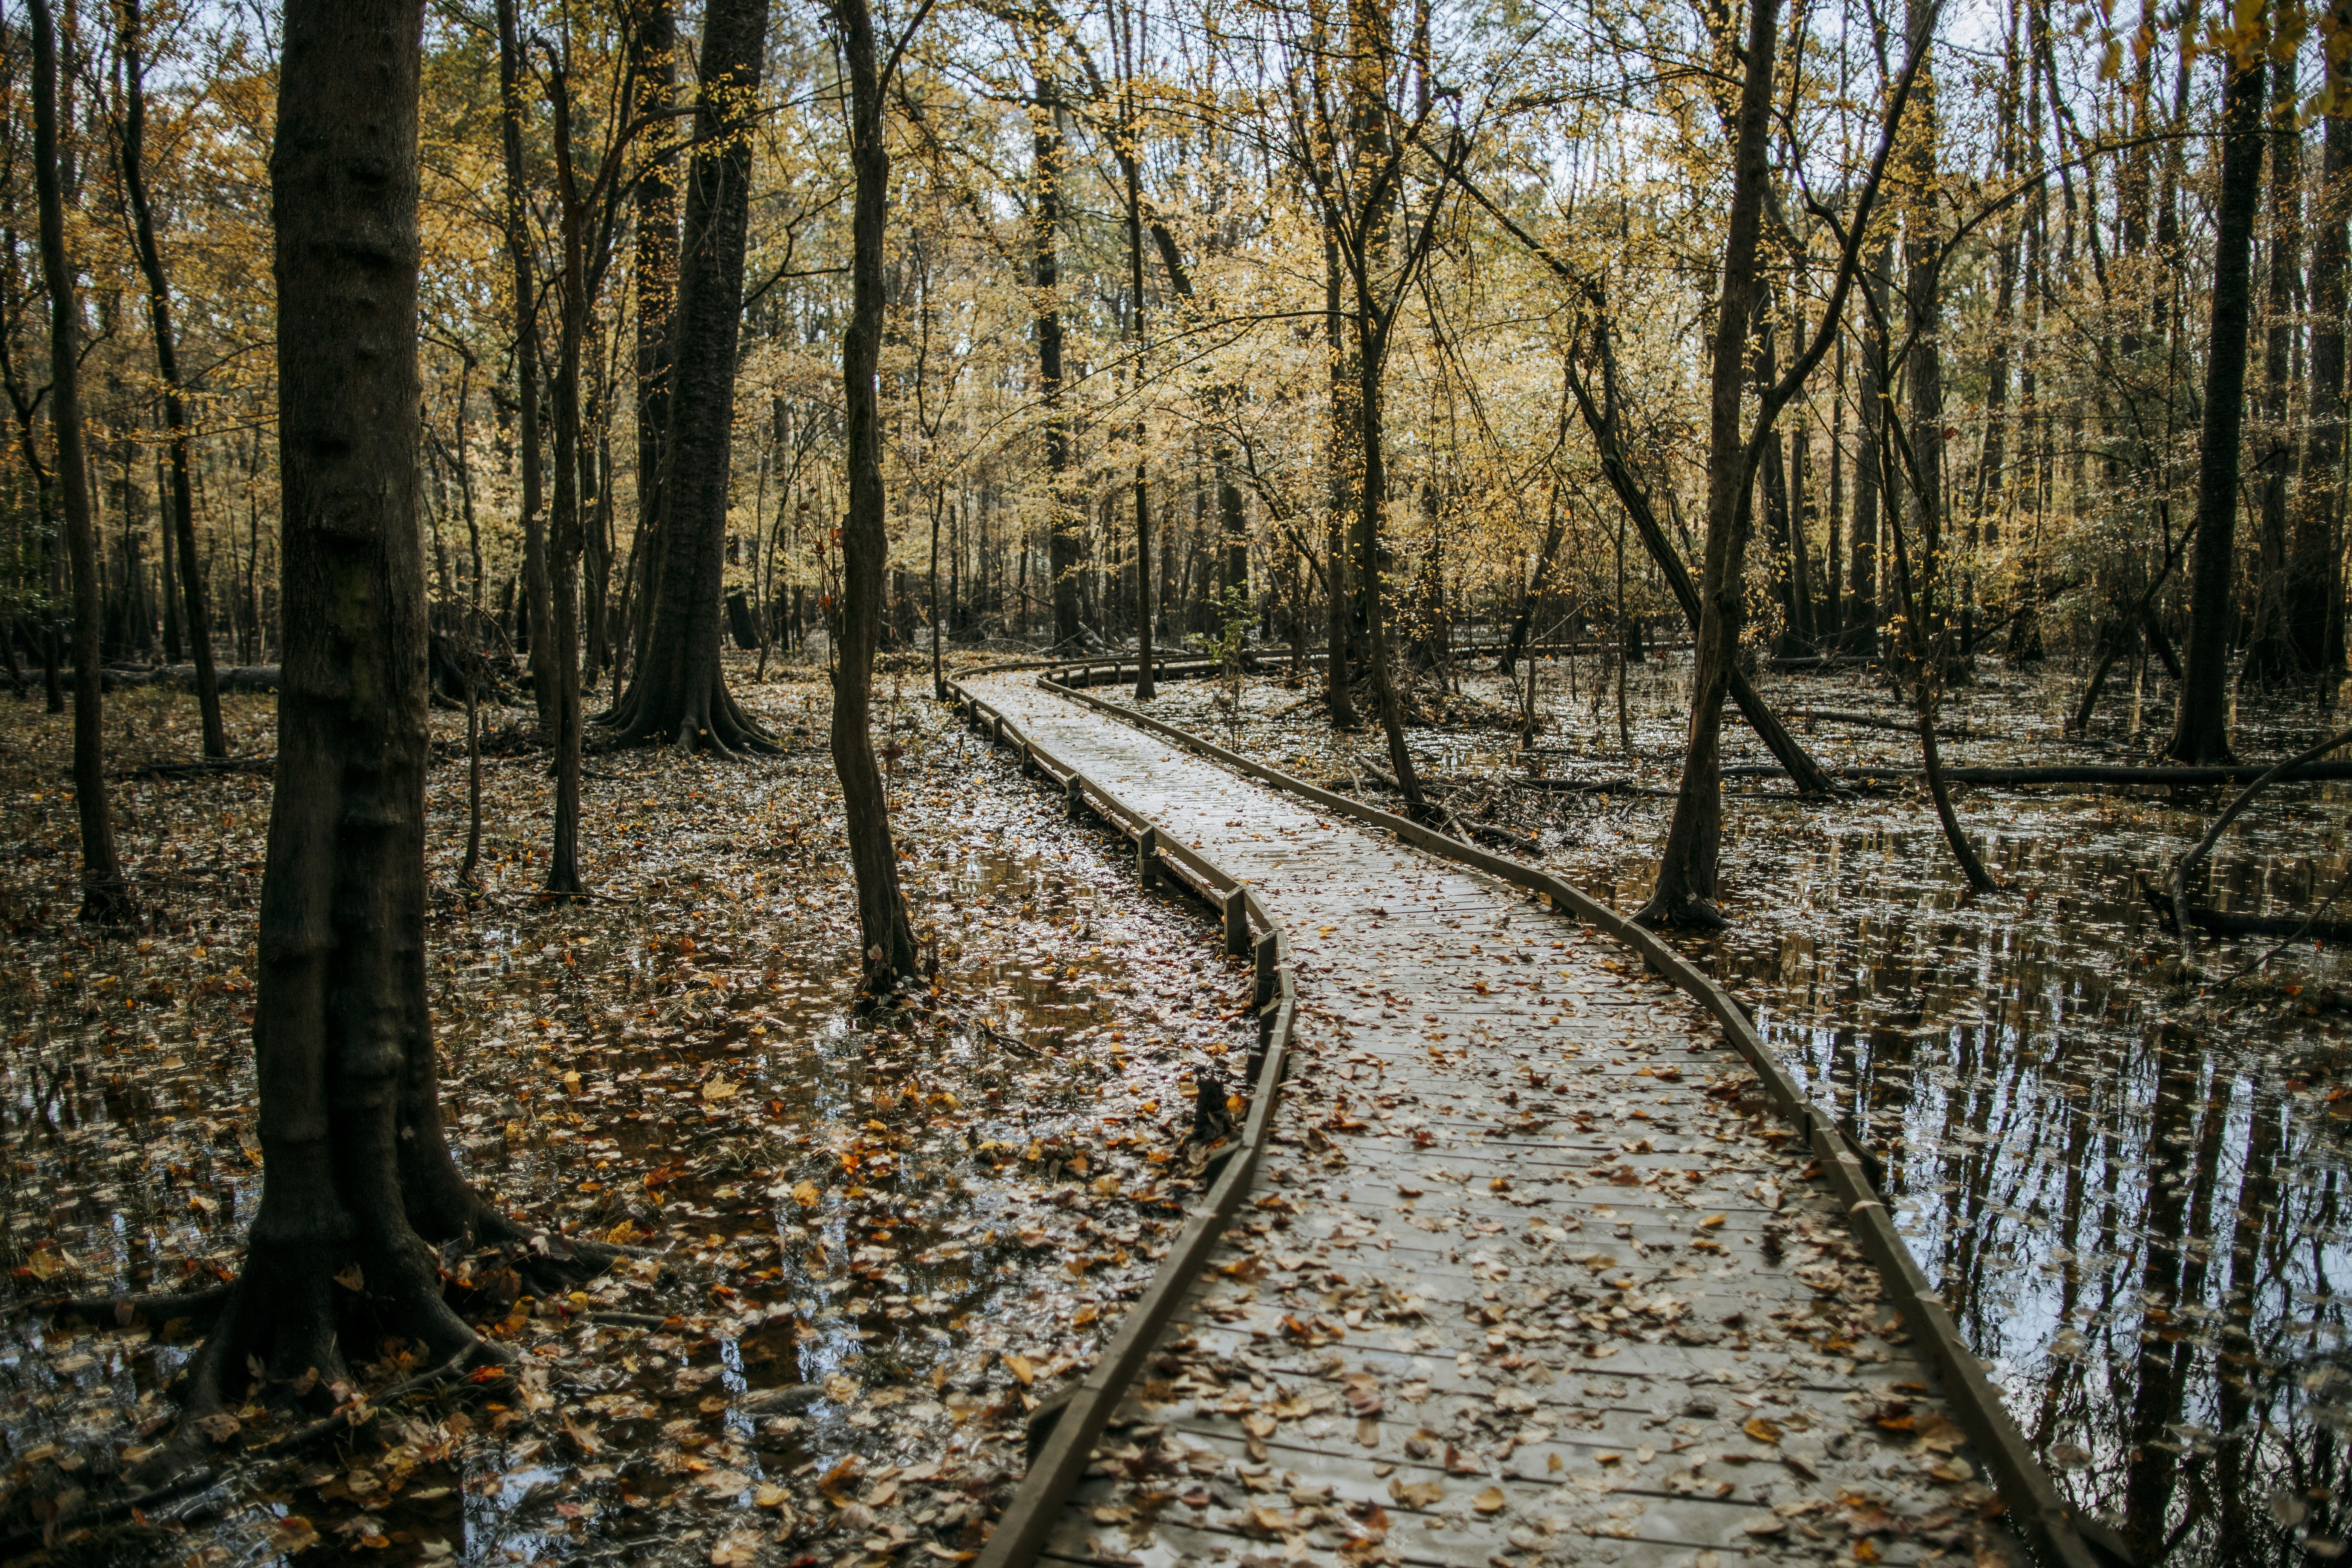 A lightly weathered wooden boardwalk covered in a light dusting of faded fall leaves spans a stretch of water surrounding a forest of trees. The water reflects the sky above, the leaves resting on its surface, and the trees themselves.